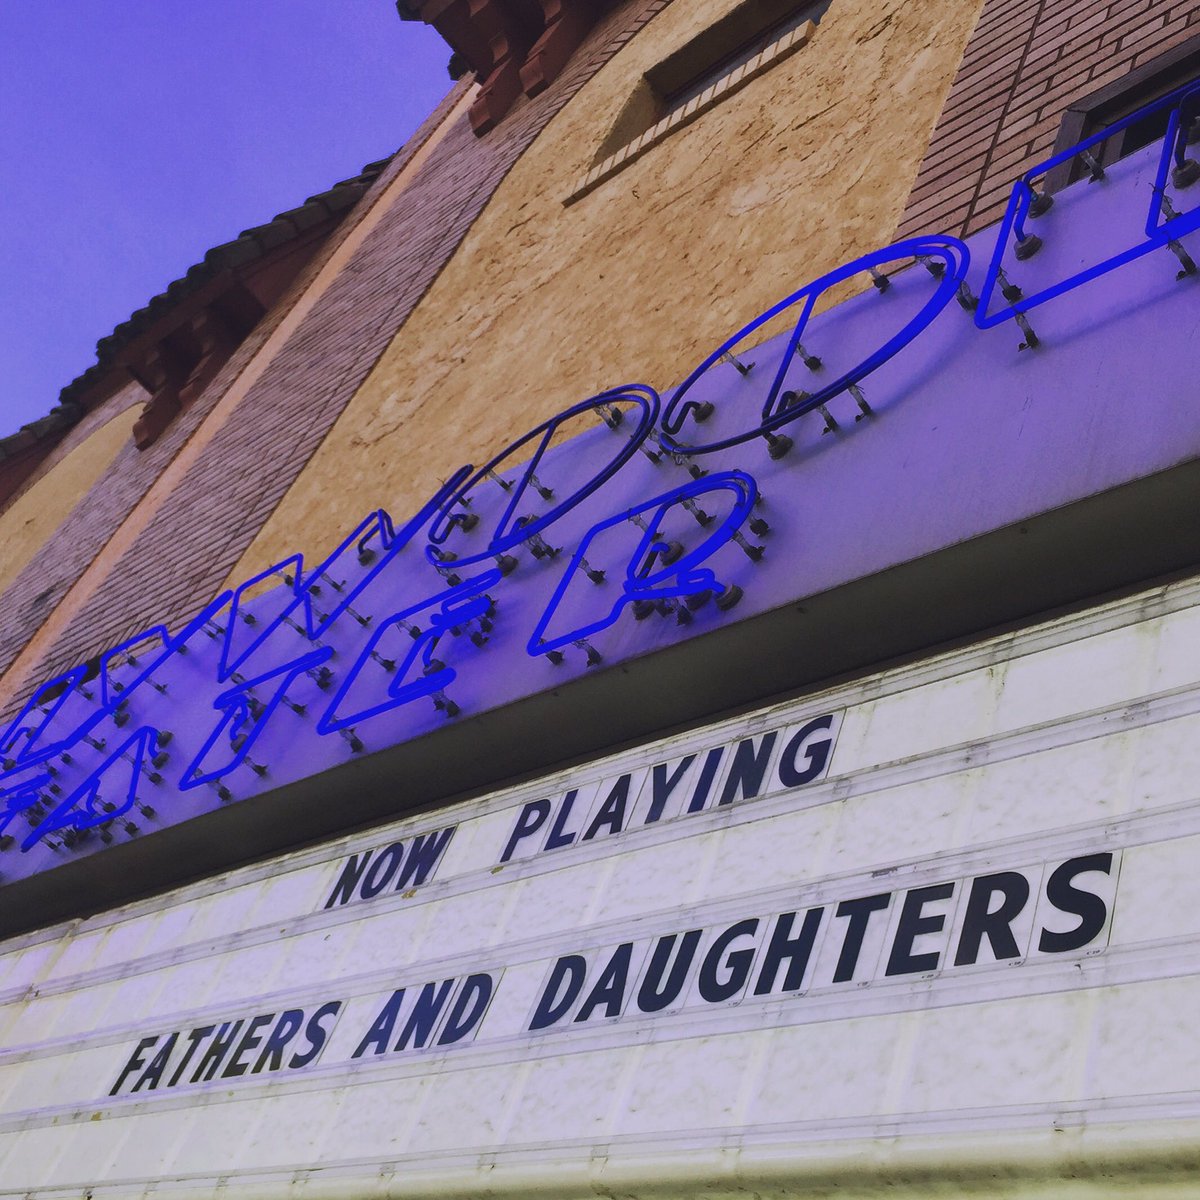 RT @benjeran: Cast & Crew showing of #FathersAndDaughters at Dormont Theater in #Pittsburgh @russellcrowe @KylieAnneRogers https://t.co/OfU…